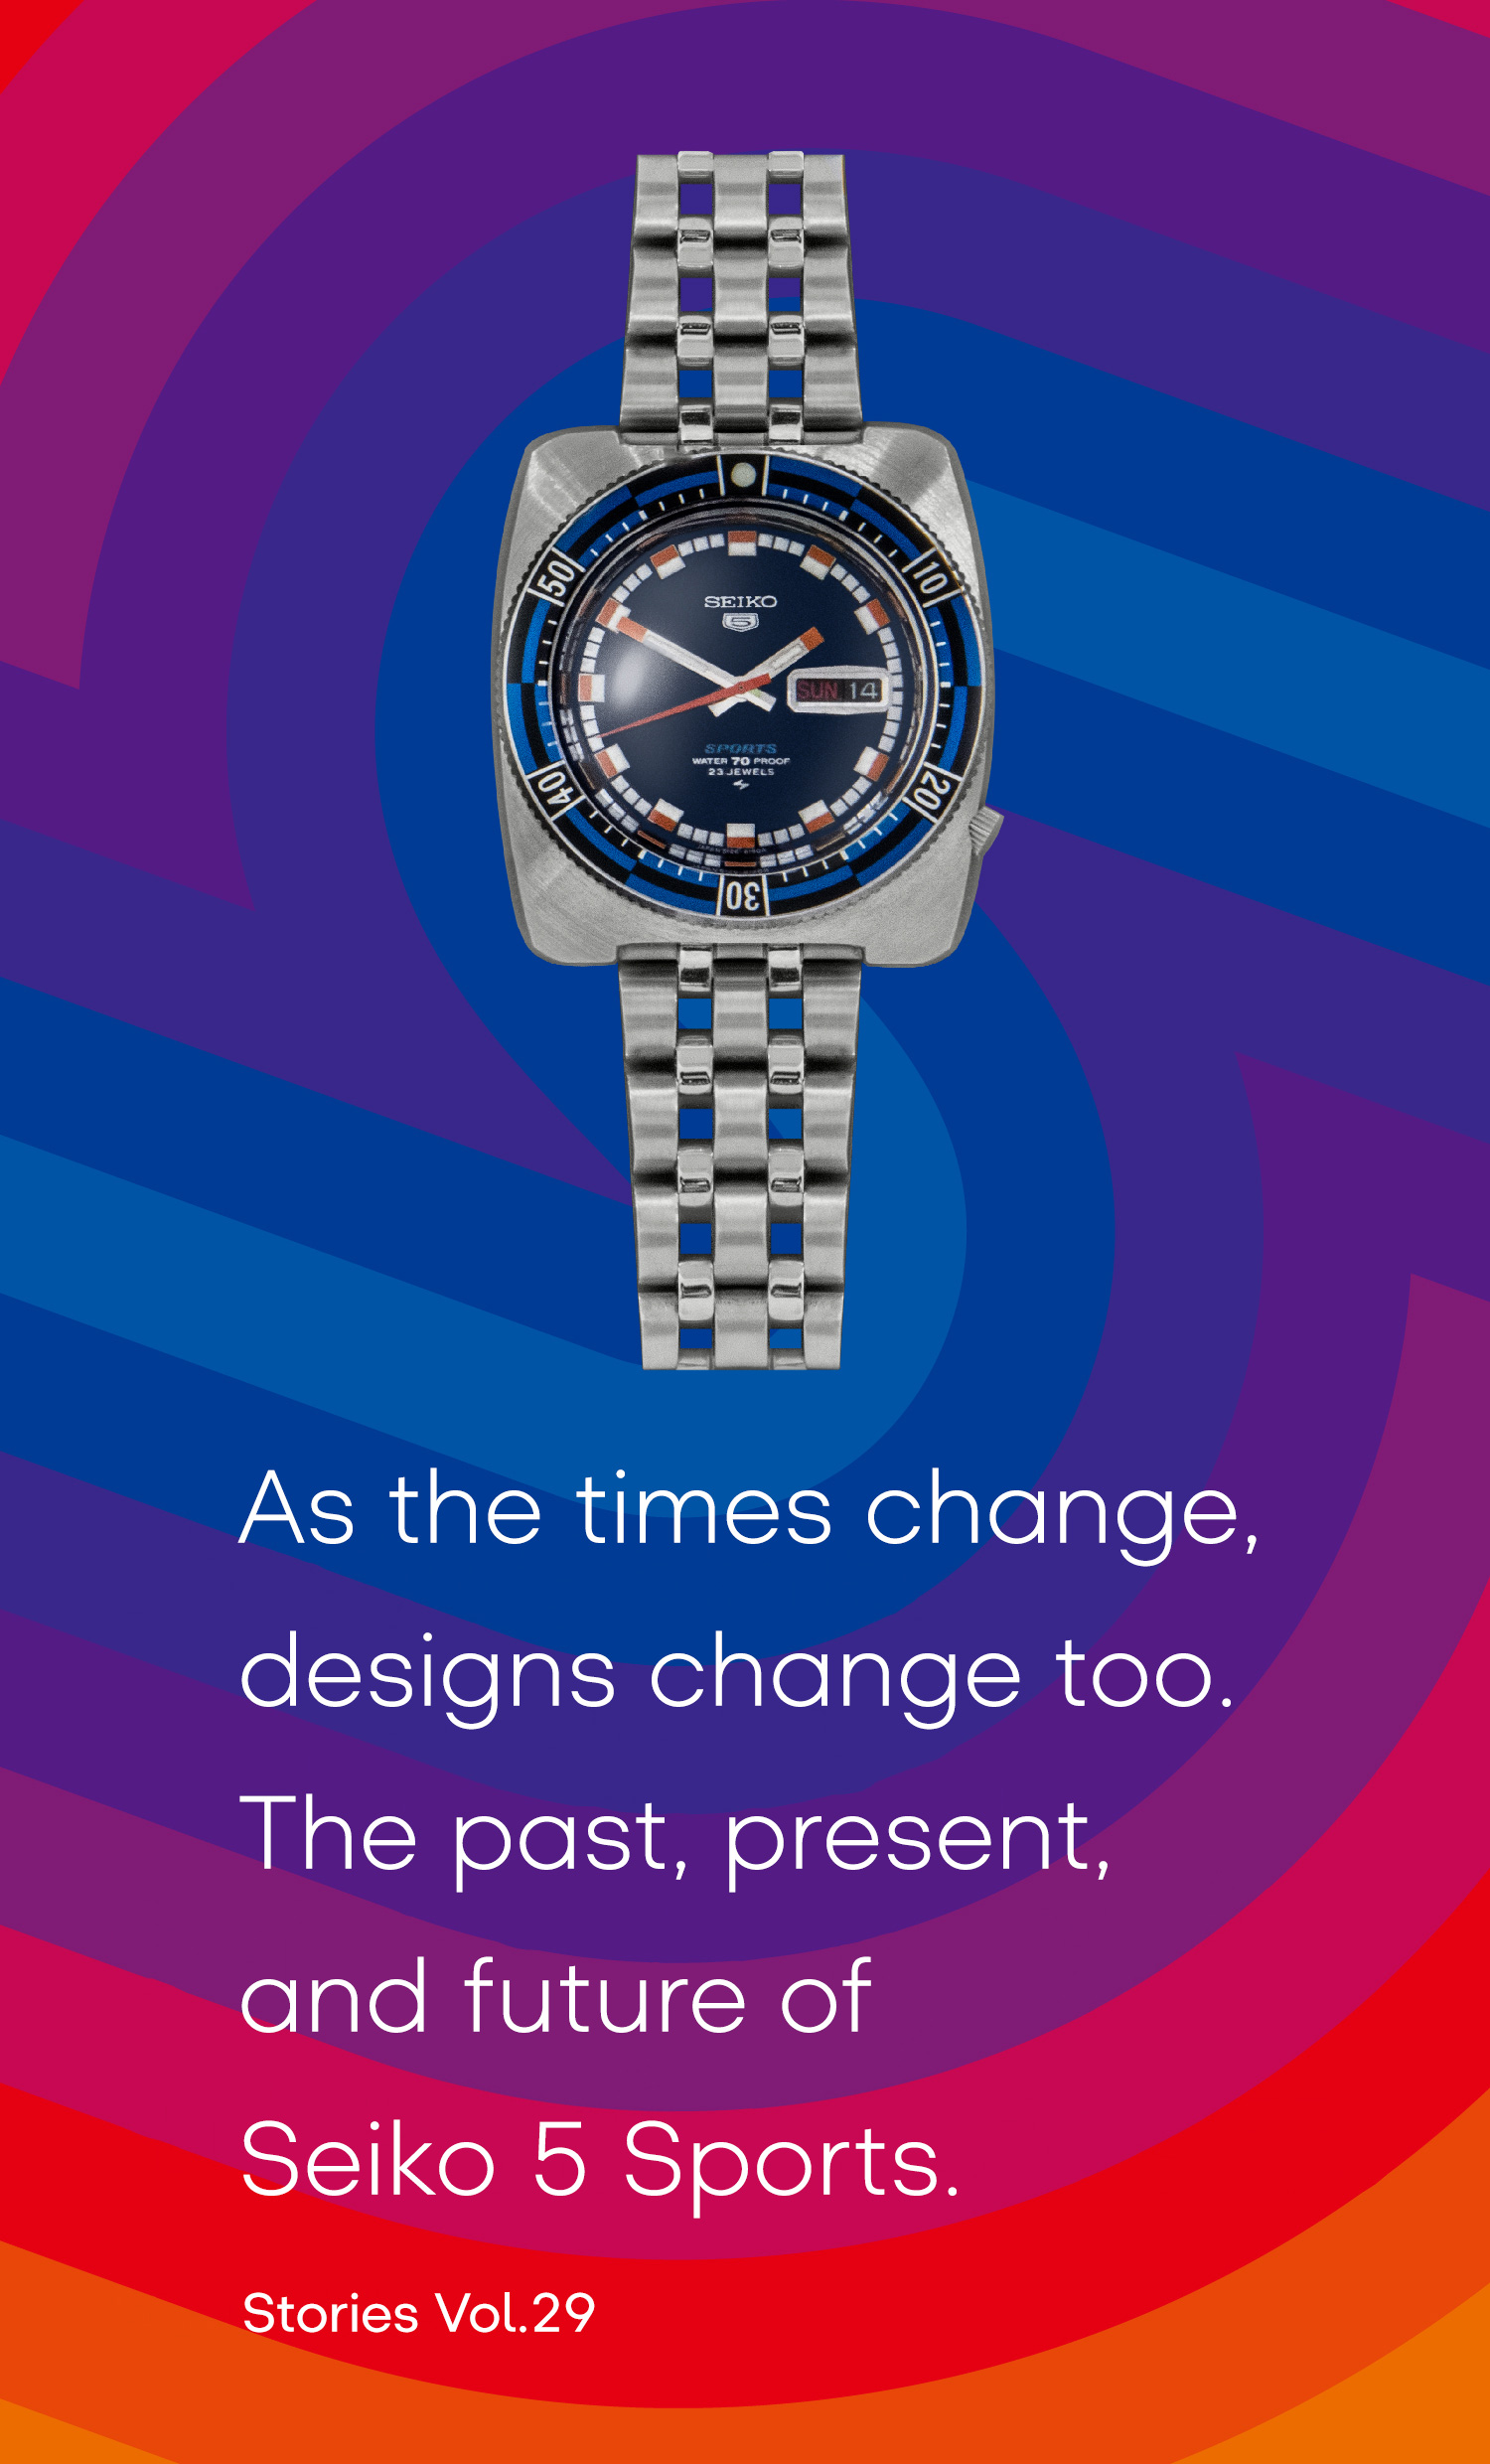  As the times change, designs change too. The past, present, and  future of Seiko 5 Sports. | by Seiko watch design